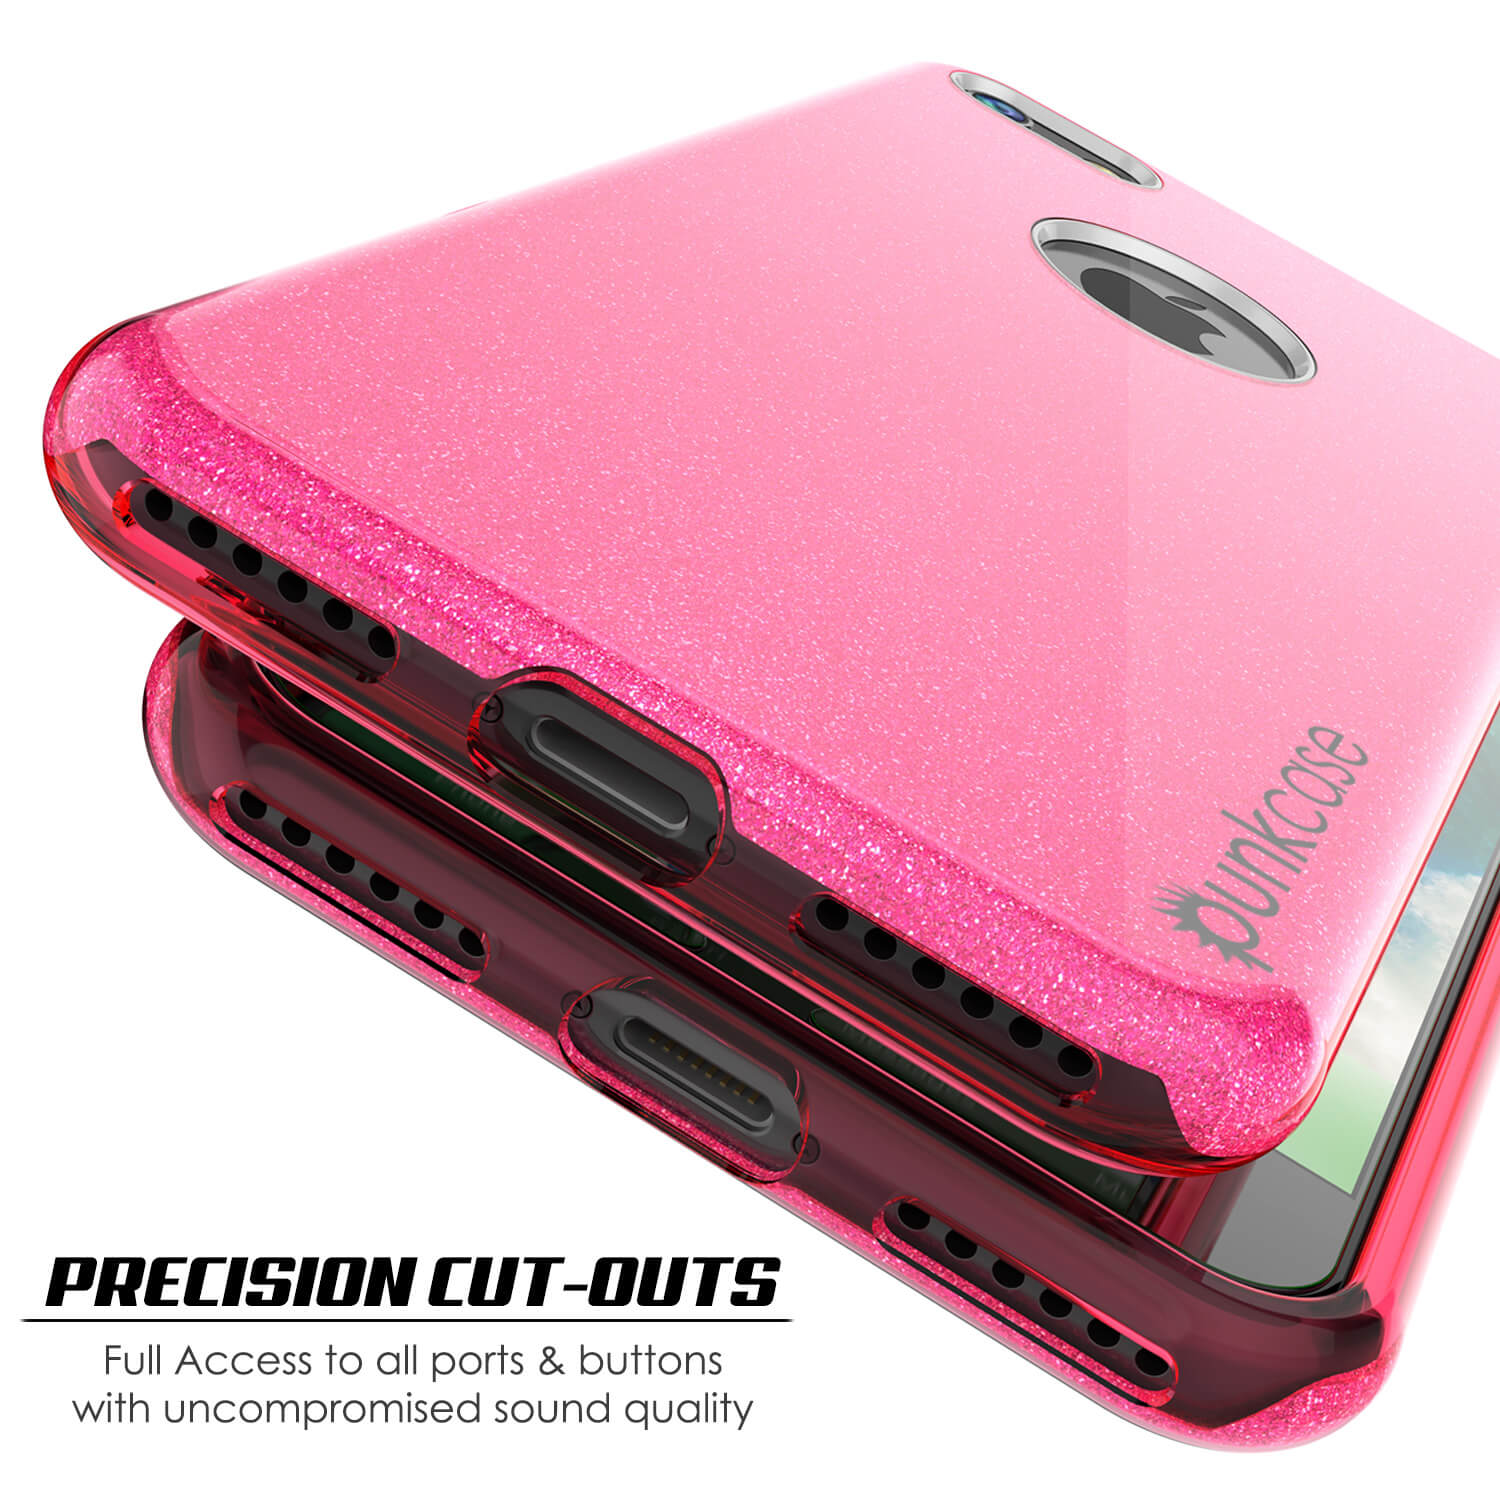 iPhone 6s/6 Case PunkCase Galactic Pink Series  Slim w/ Tempered Glass | Lifetime Warranty - PunkCase NZ